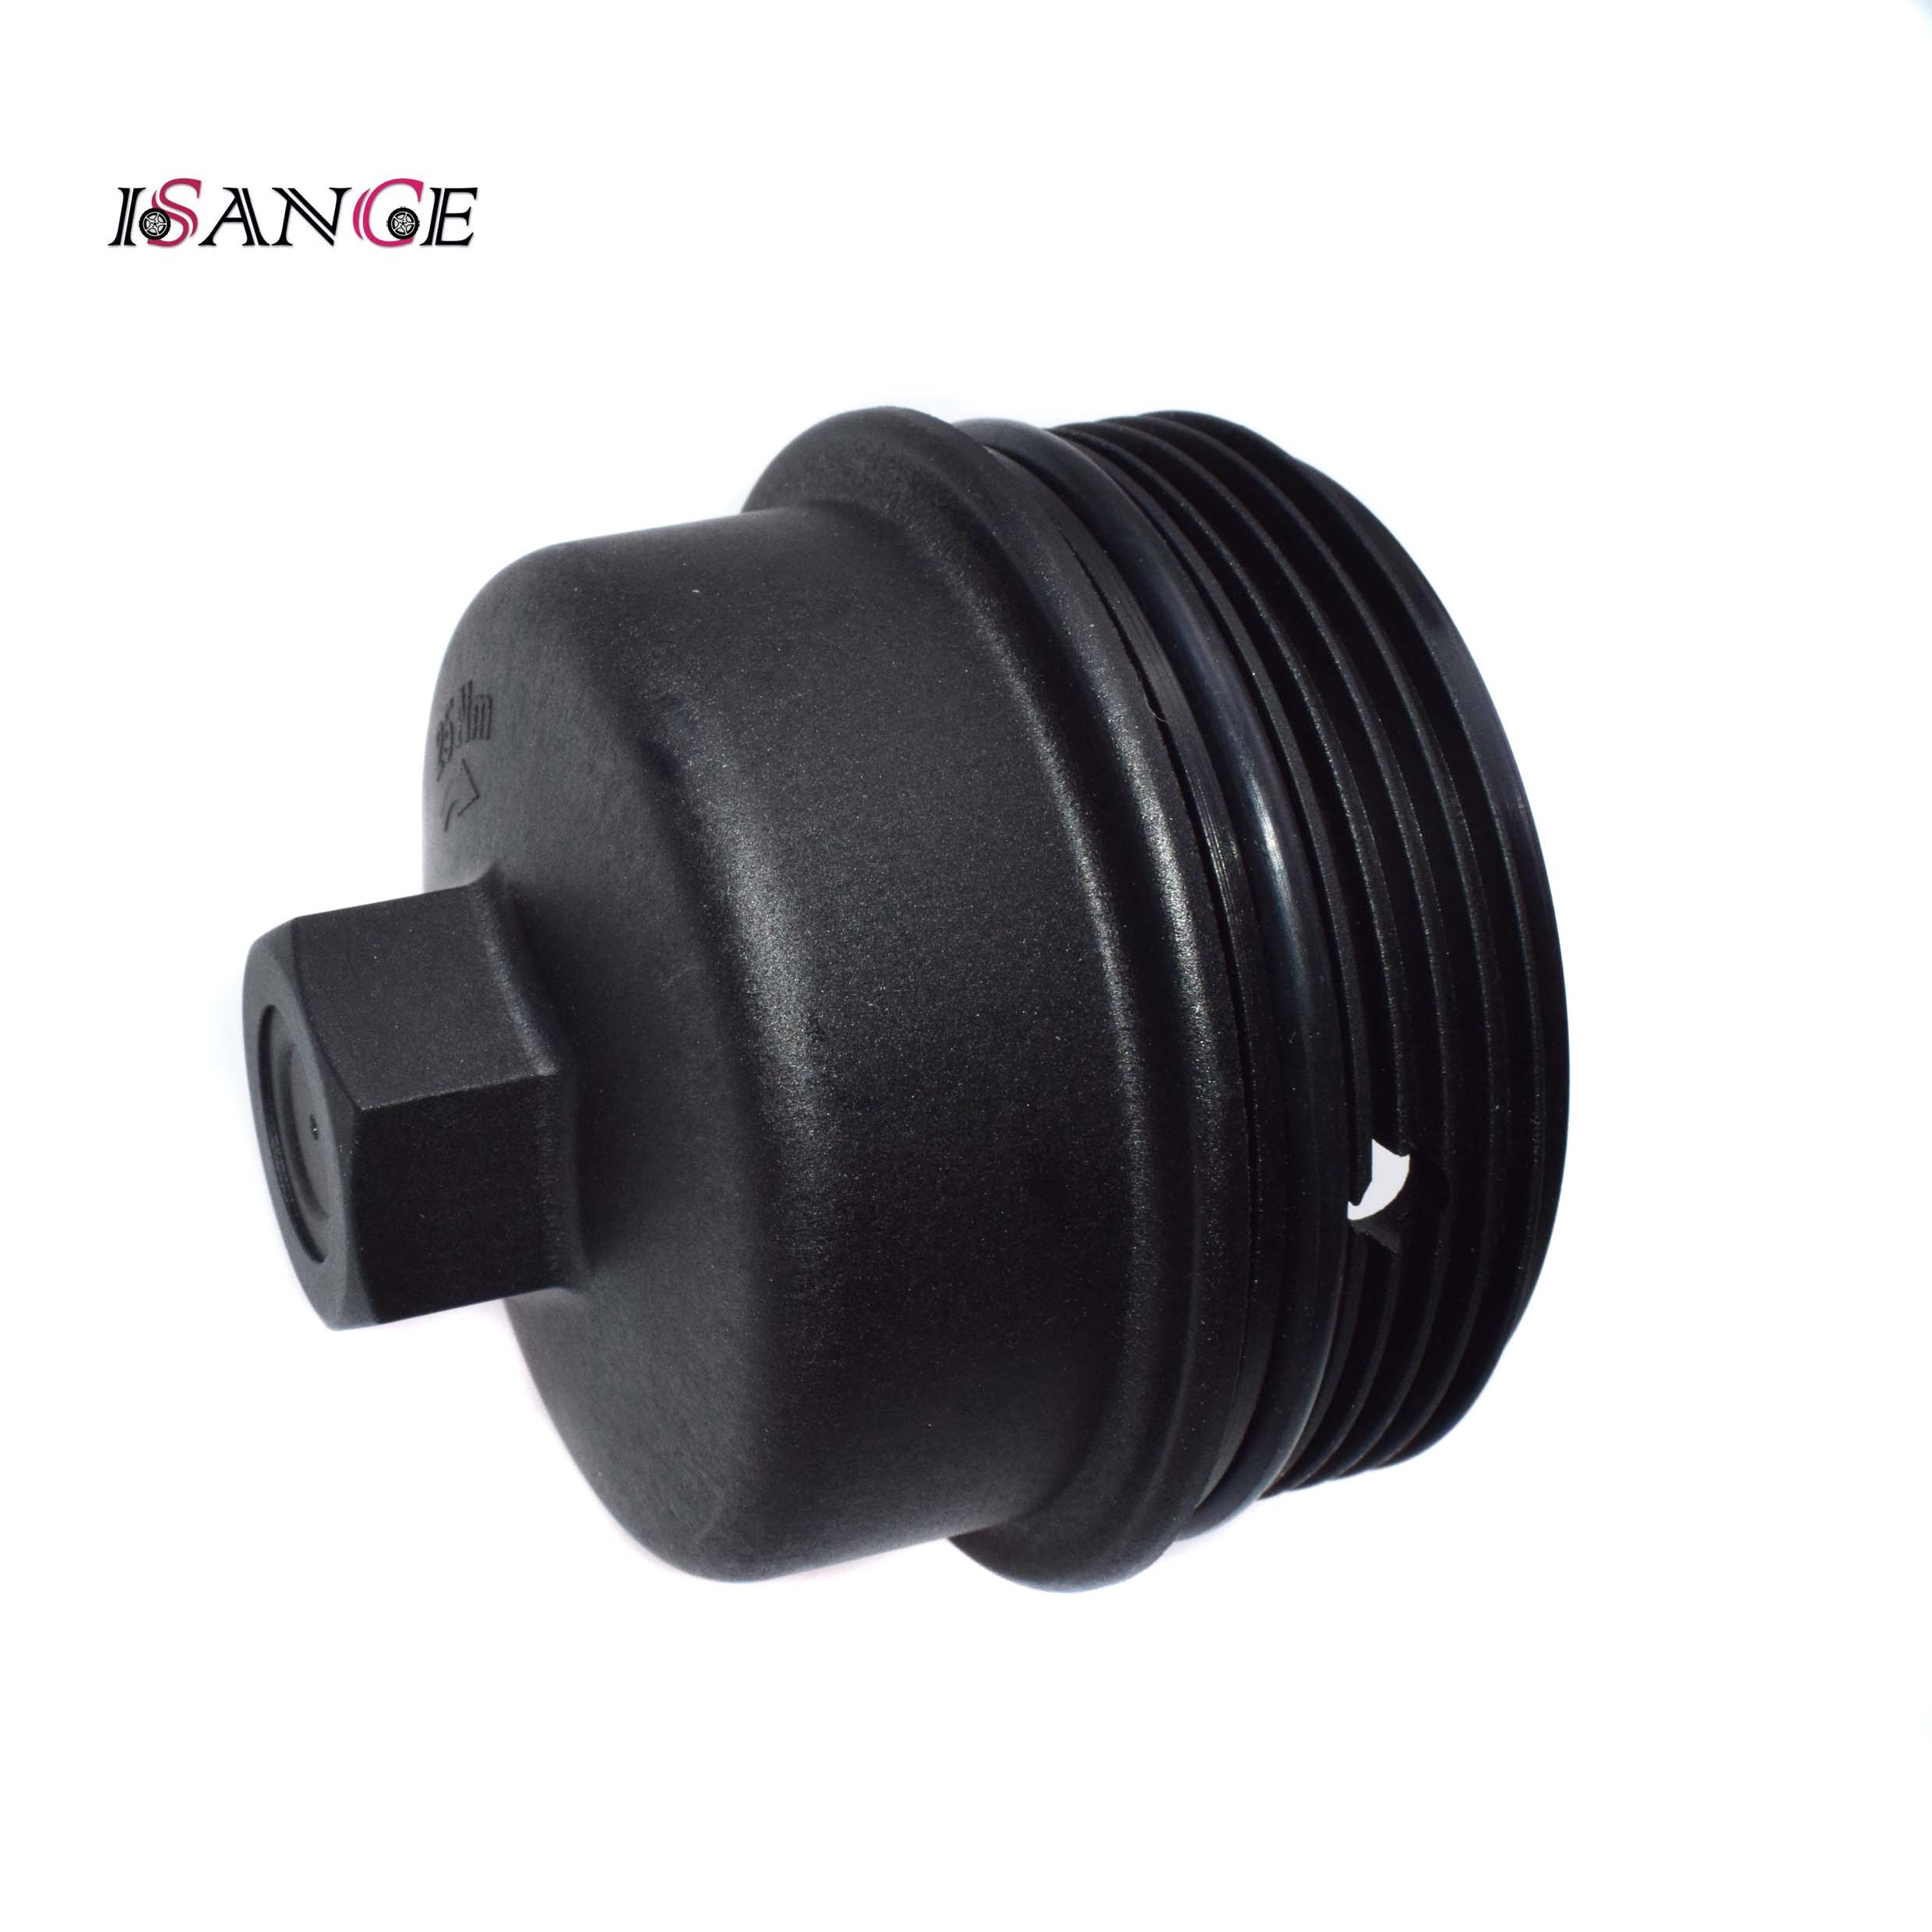 ISANCE Olie Filter Behuizing Cap Voor Chevrolet Buick Pontiac G3 Encore Sonic Trax Cruze Astra OE #55353325 55593189